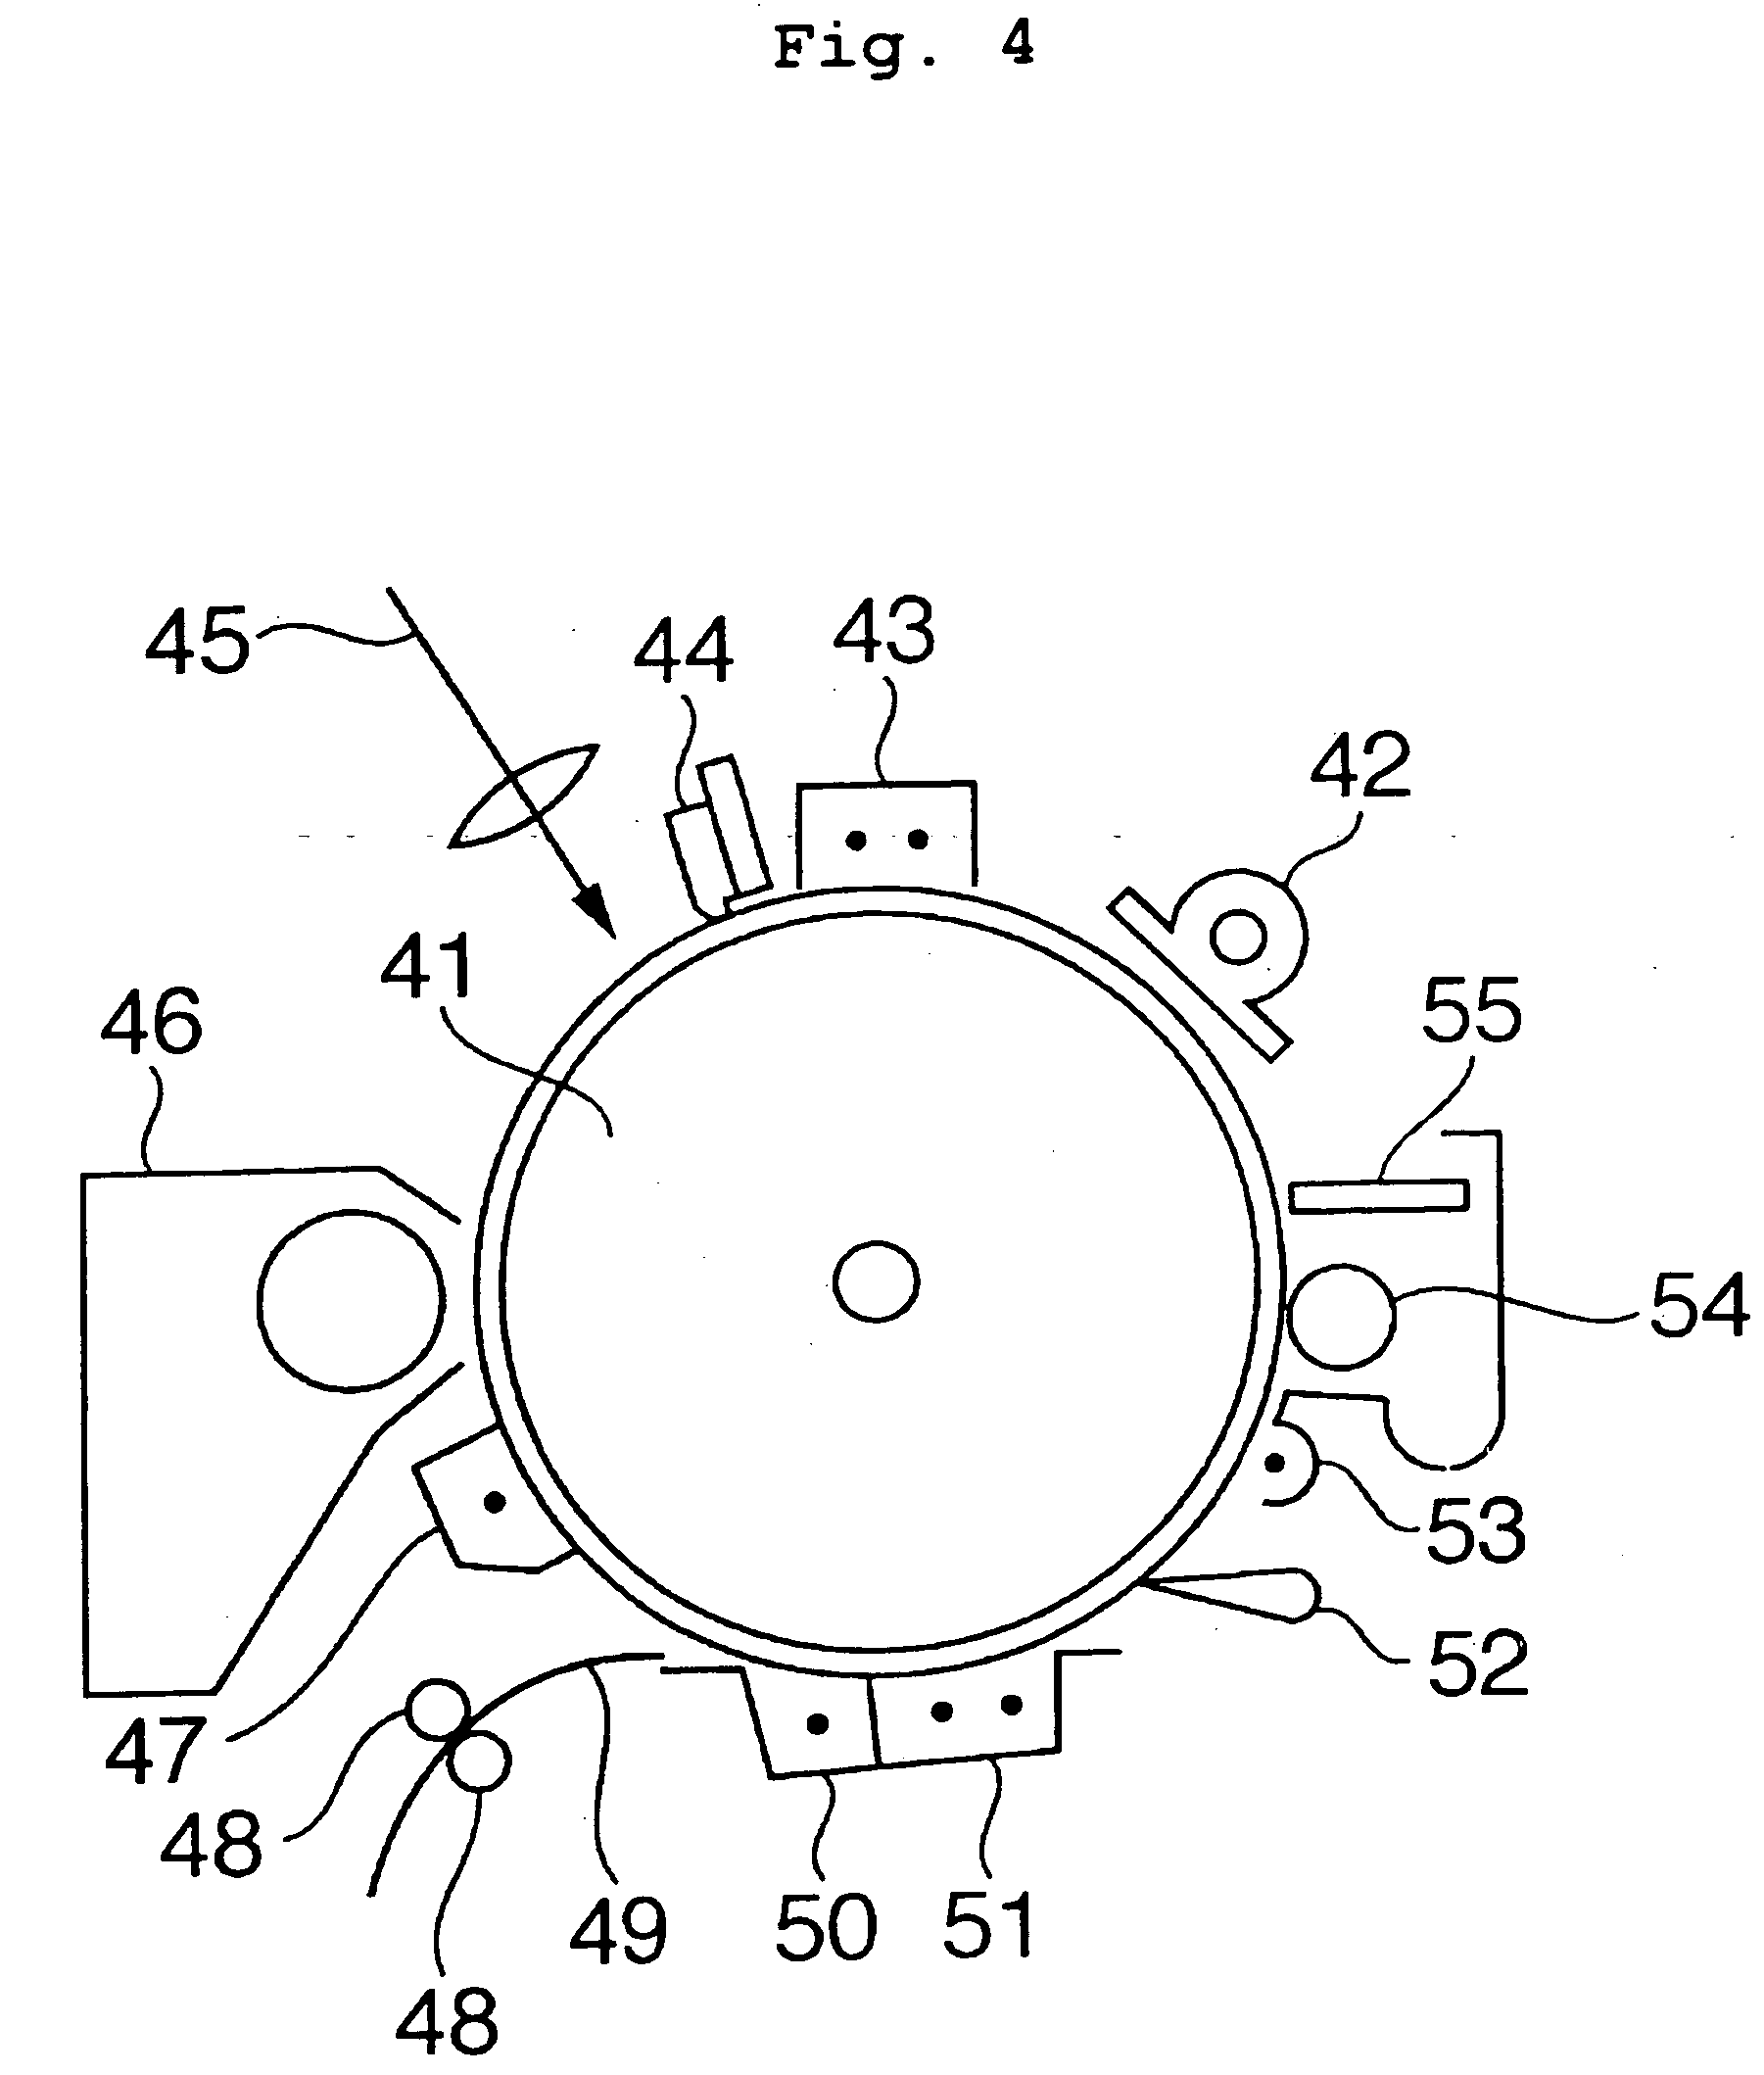 Coating liquid for an intermediate layer of electrophotographic photoconductor, manufacturing method thereof, electrophotographic photoconductor, electrophotographic apparatus, and electrophotographic photoconductor process cartridge using same